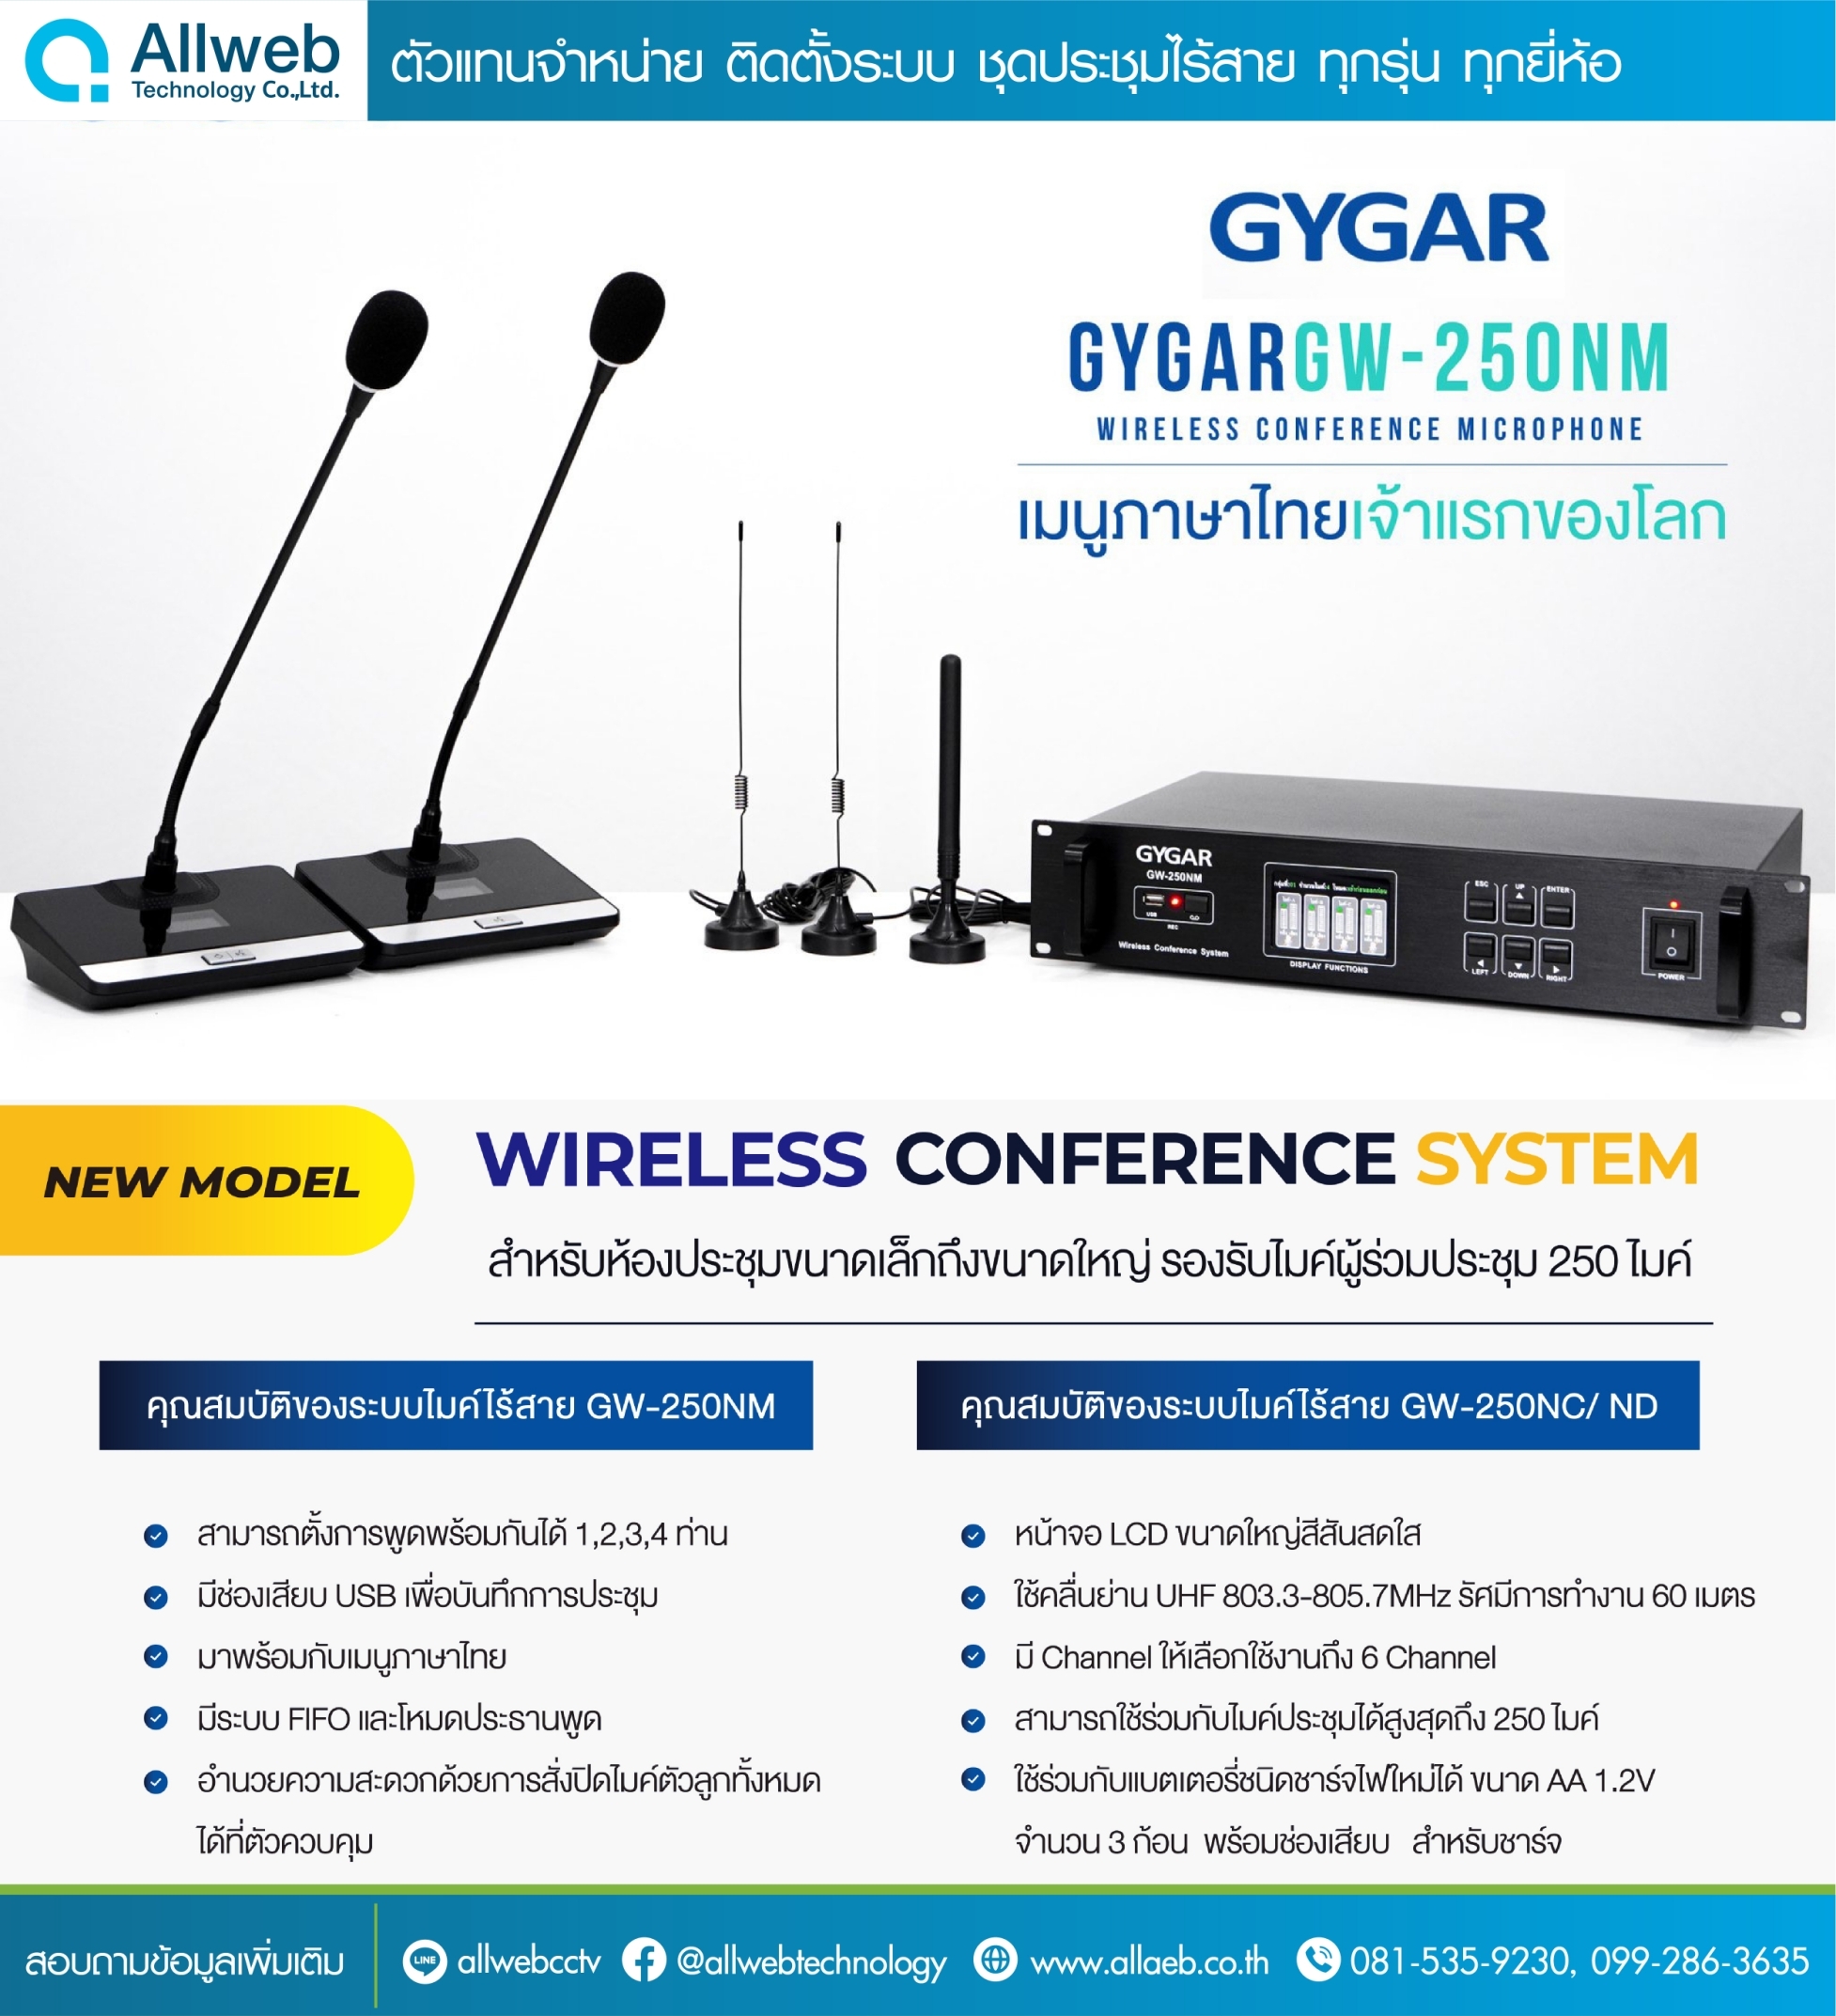 WIRELESS CONFERENCE SYSTEM